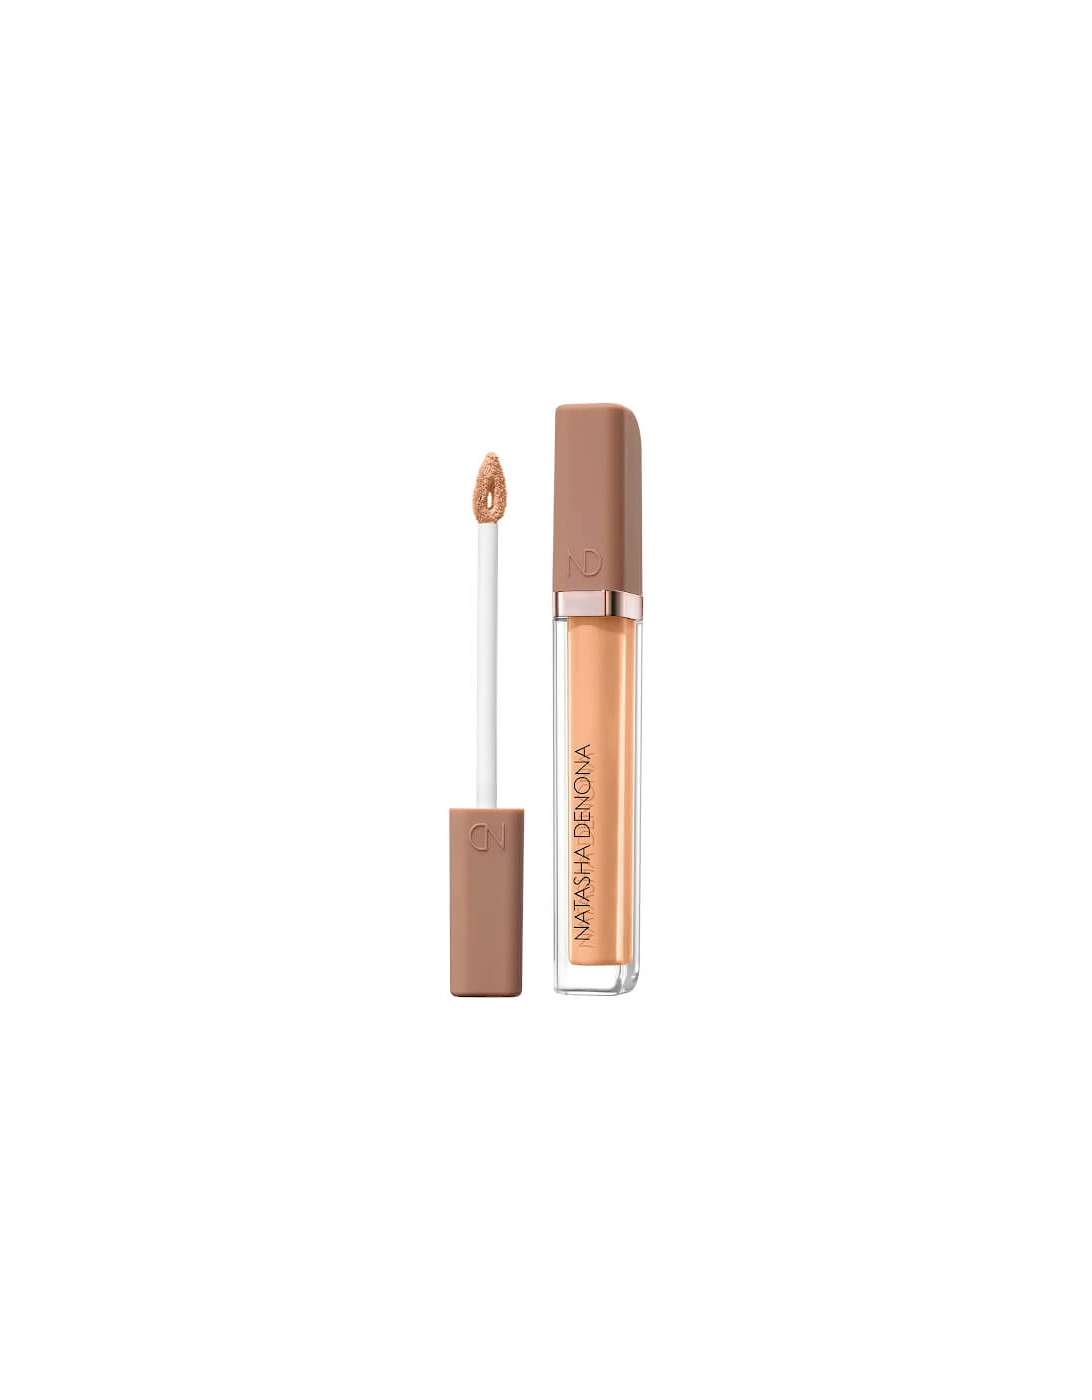 Hy-Glam Concealer - P4, 2 of 1